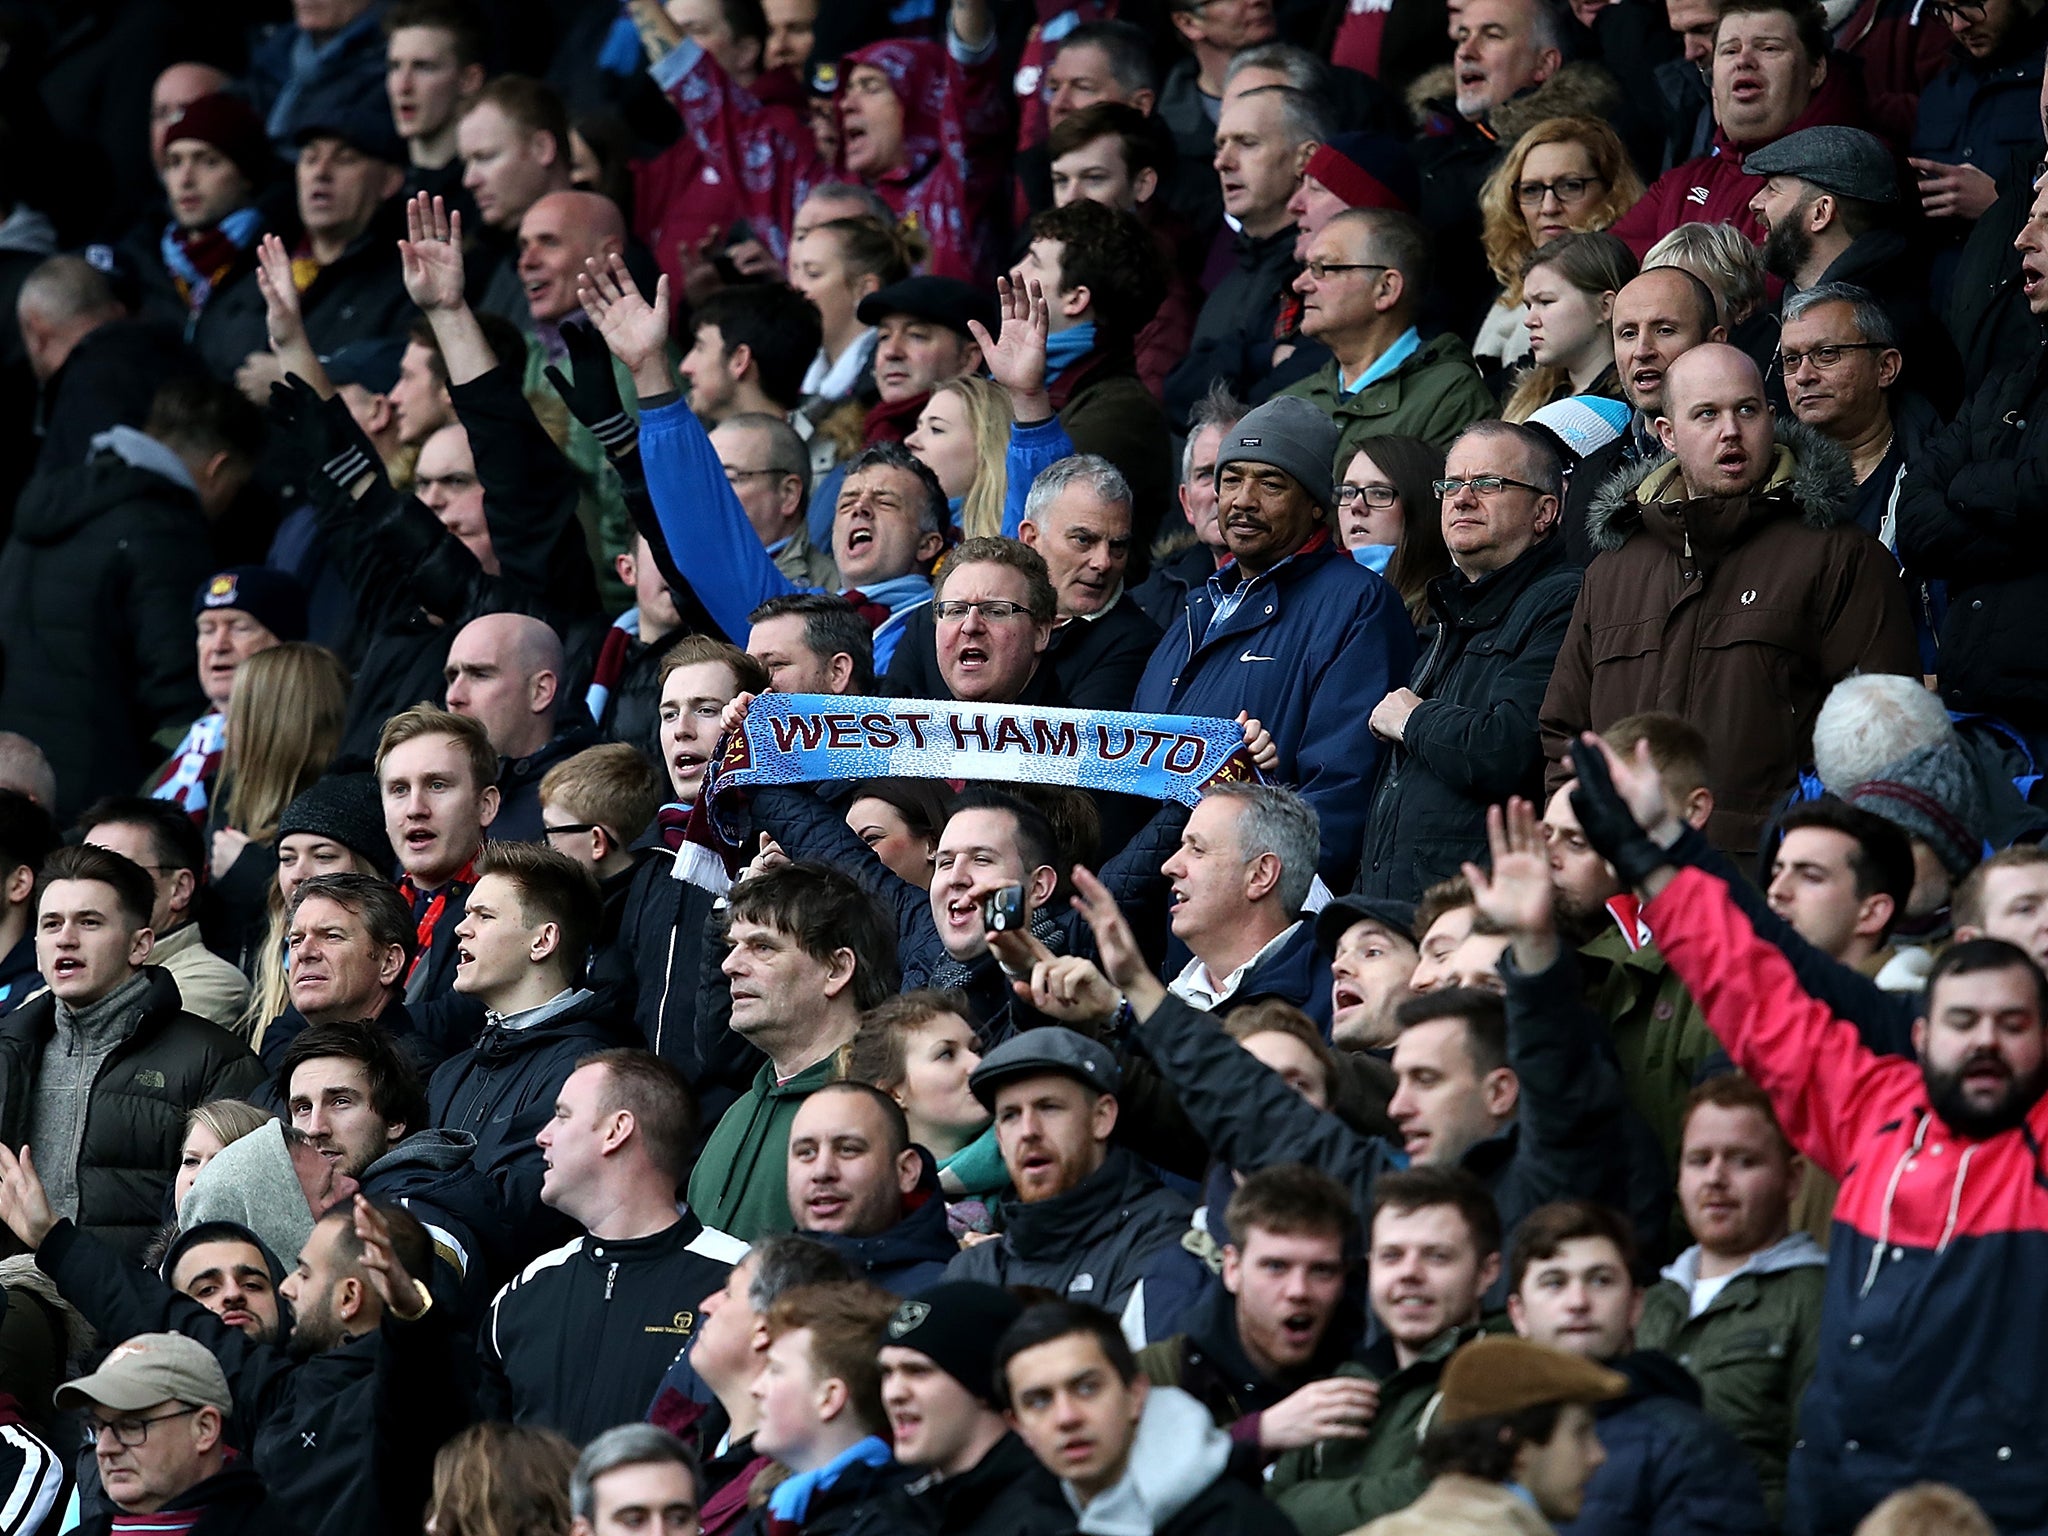 &#13;
Upton Park has been 99.75 per cent full on average this season&#13;